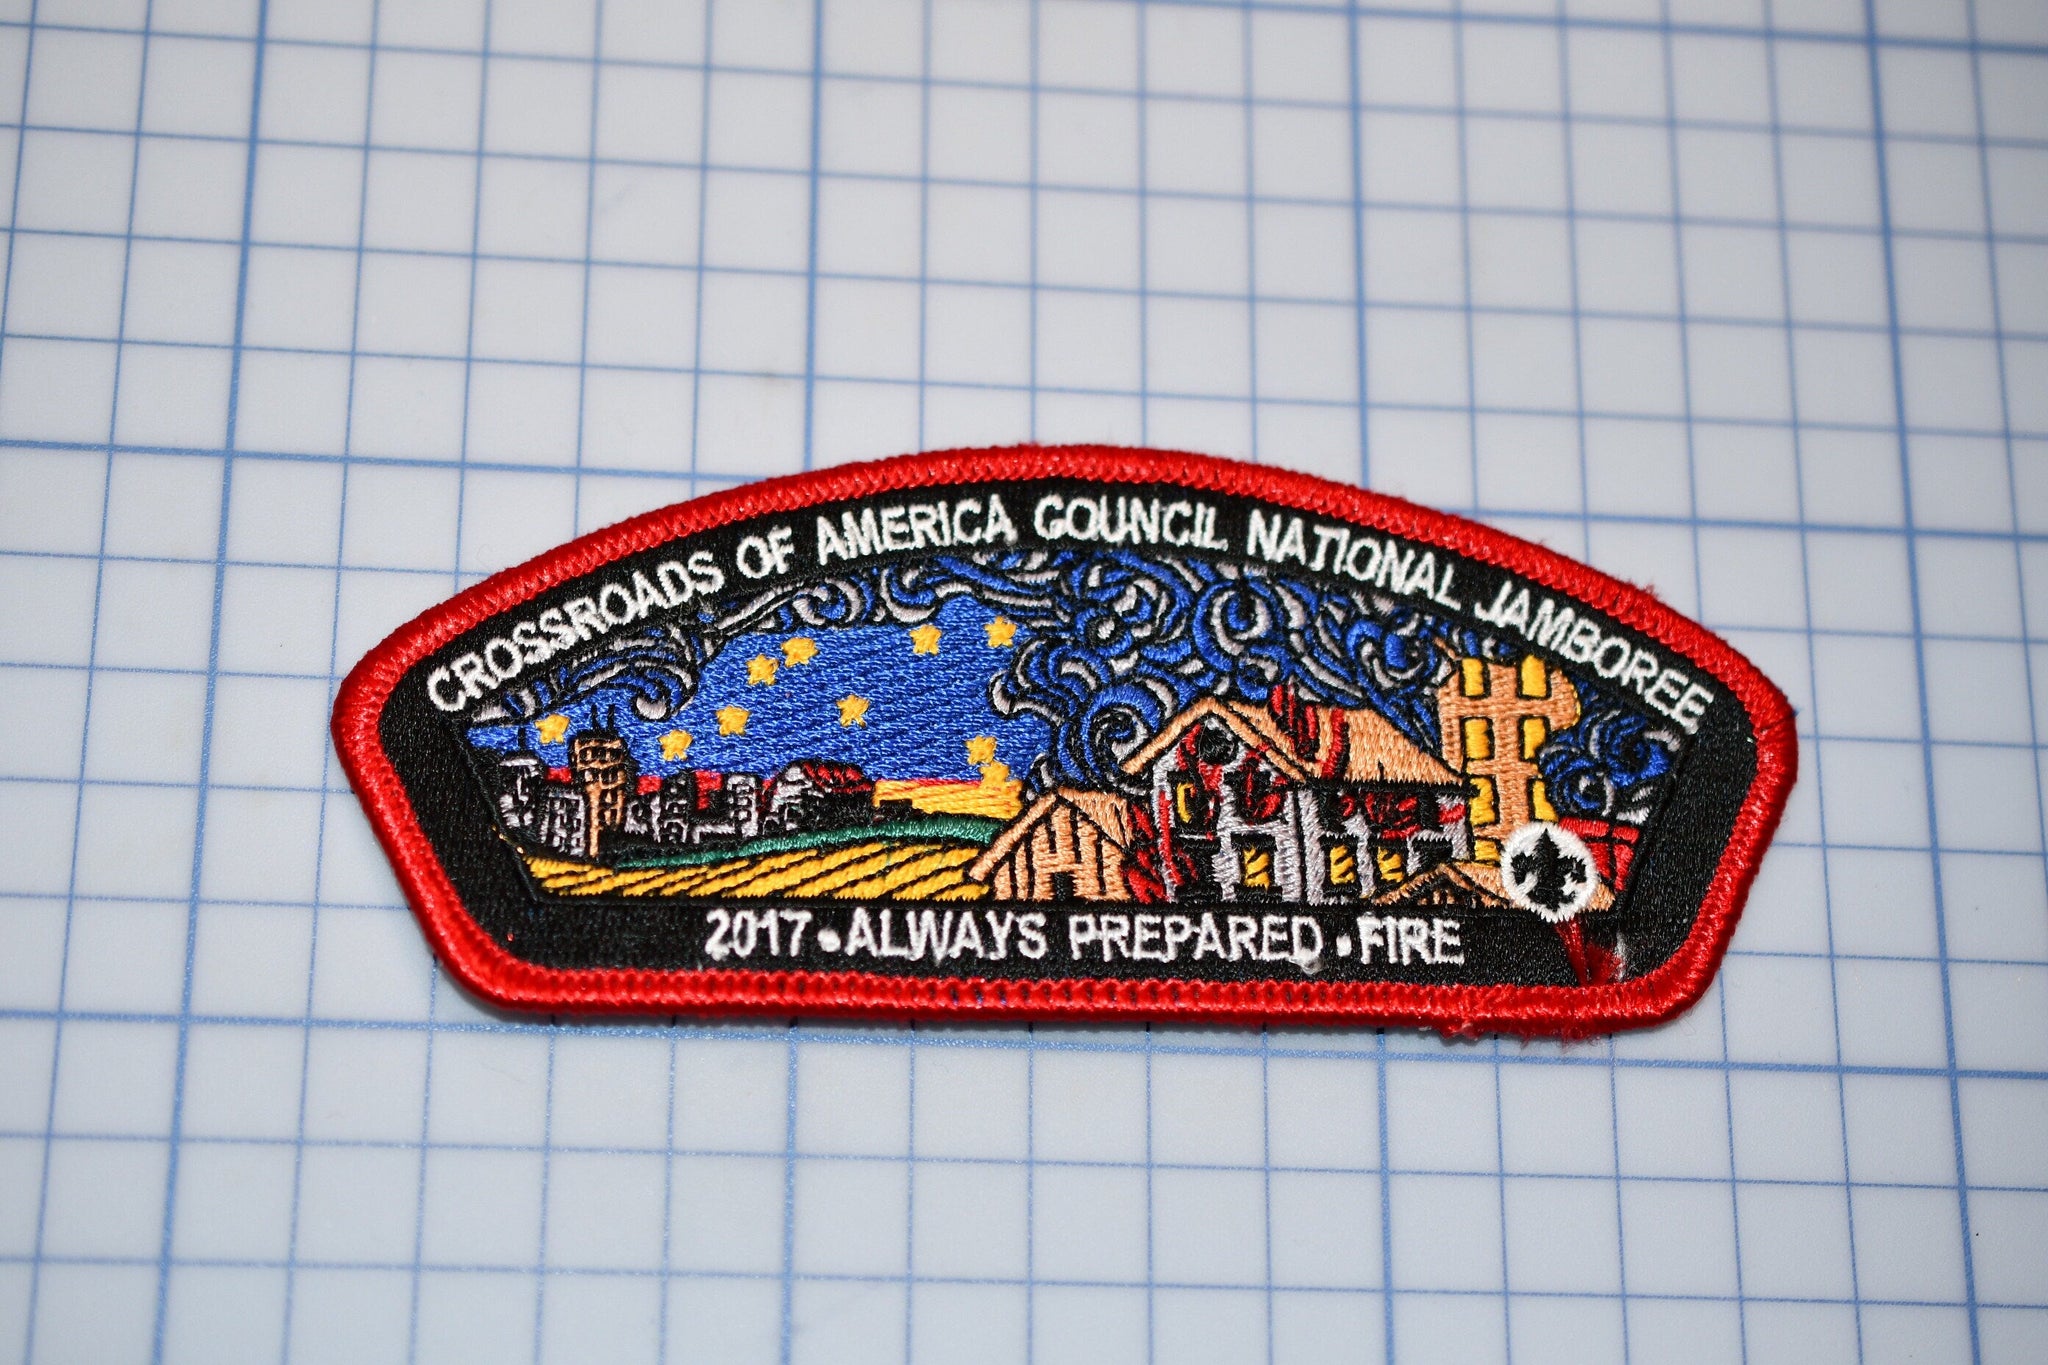 Crossroads Of America Council Scouting National Jamboree 2017 Patch (B25-335)